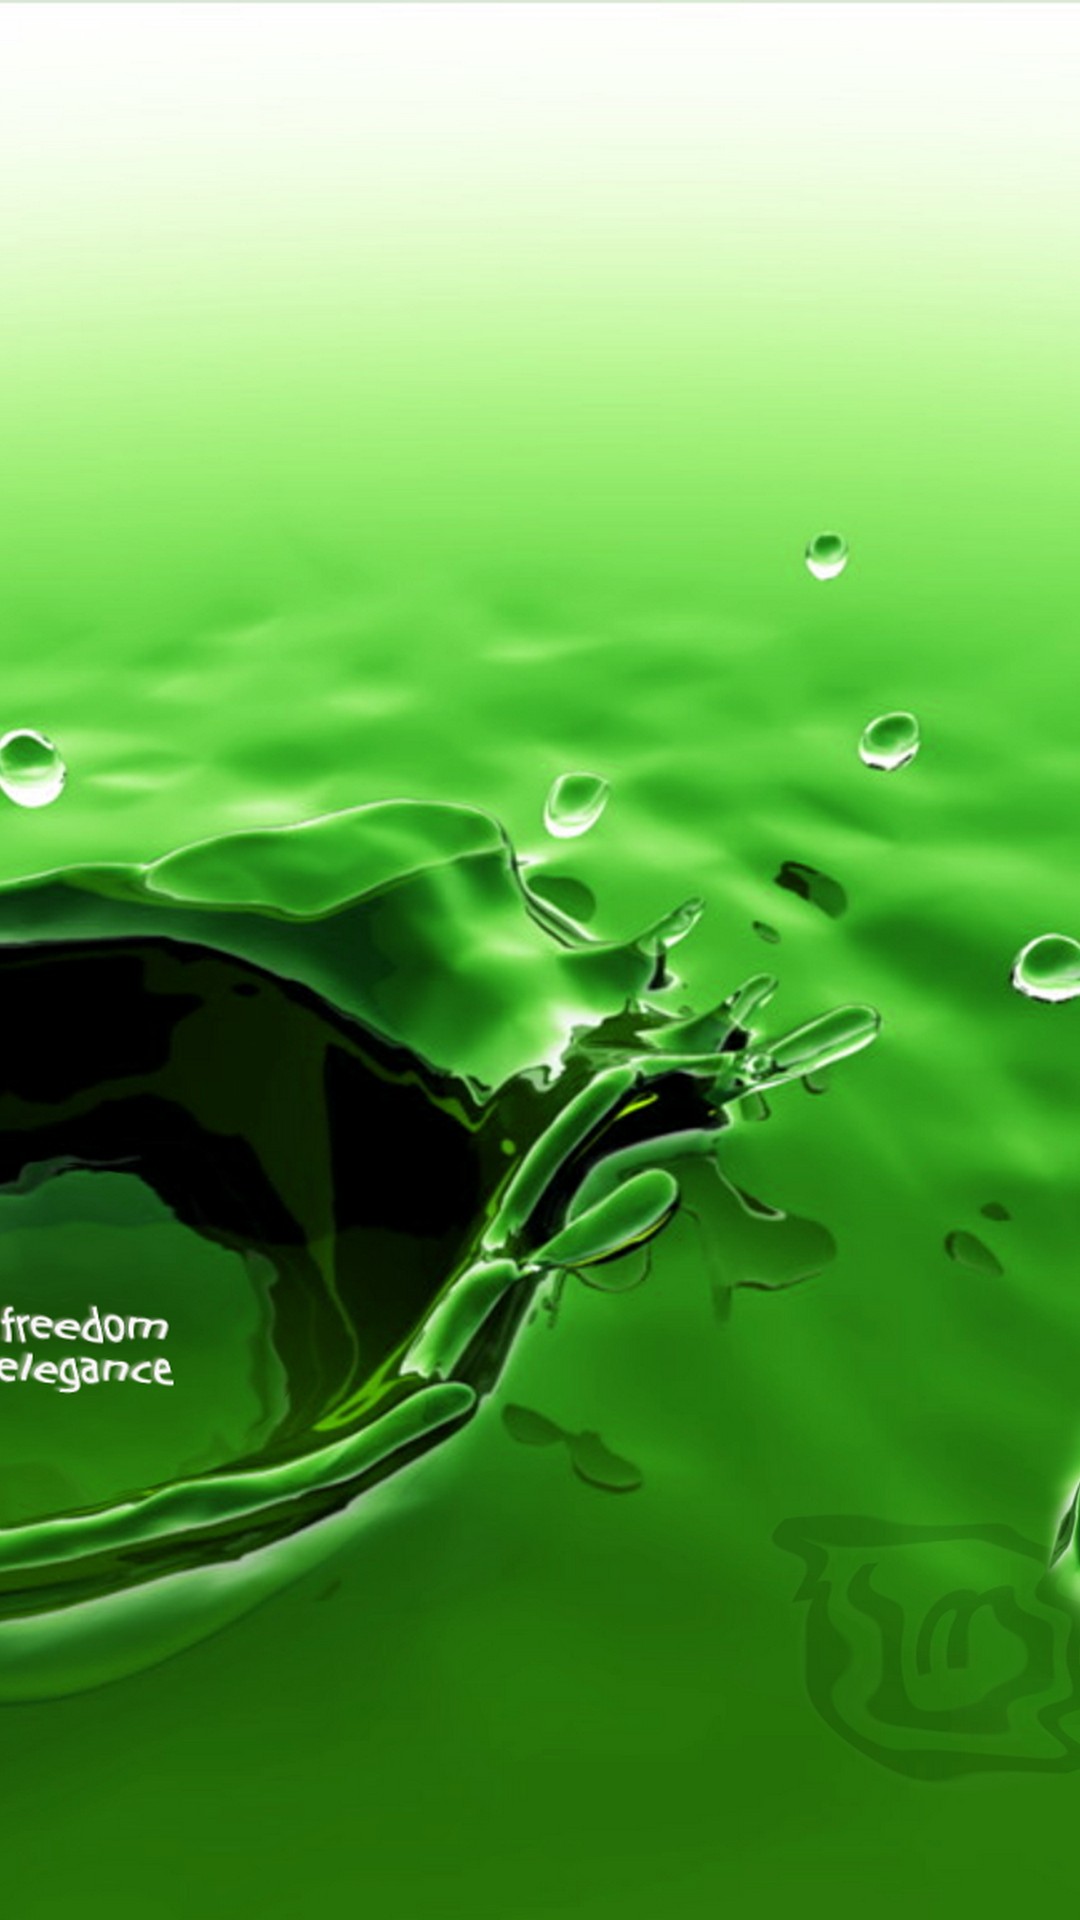 Android Wallpaper Green Colour with resolution 1080X1920 pixel. You can make this wallpaper for your Android backgrounds, Tablet, Smartphones Screensavers and Mobile Phone Lock Screen